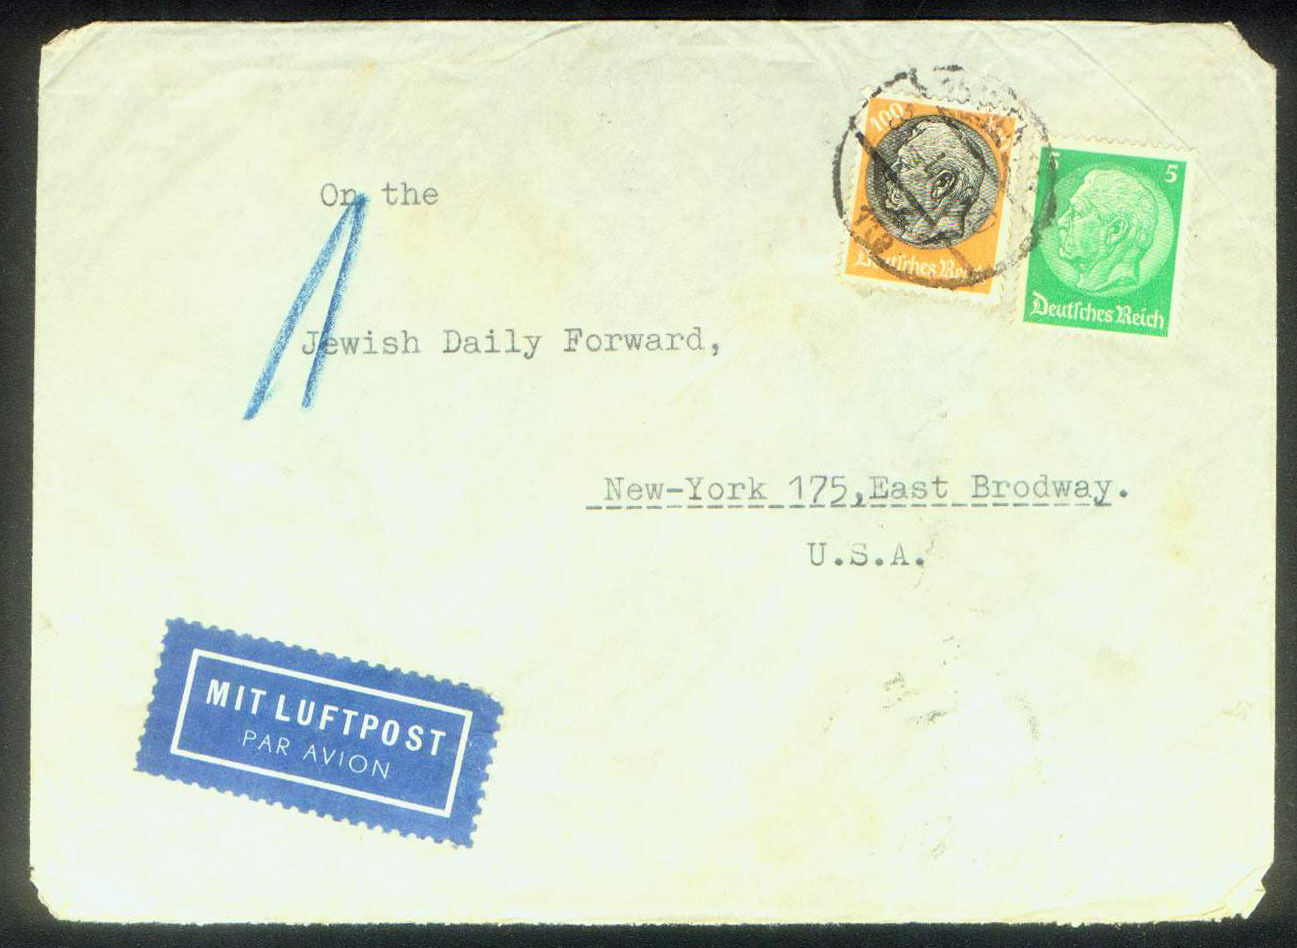 1940 VIENNA COVER with NAZI CENSOR STRIP to the JEWISH DAILY FORWARD in NEW YORK